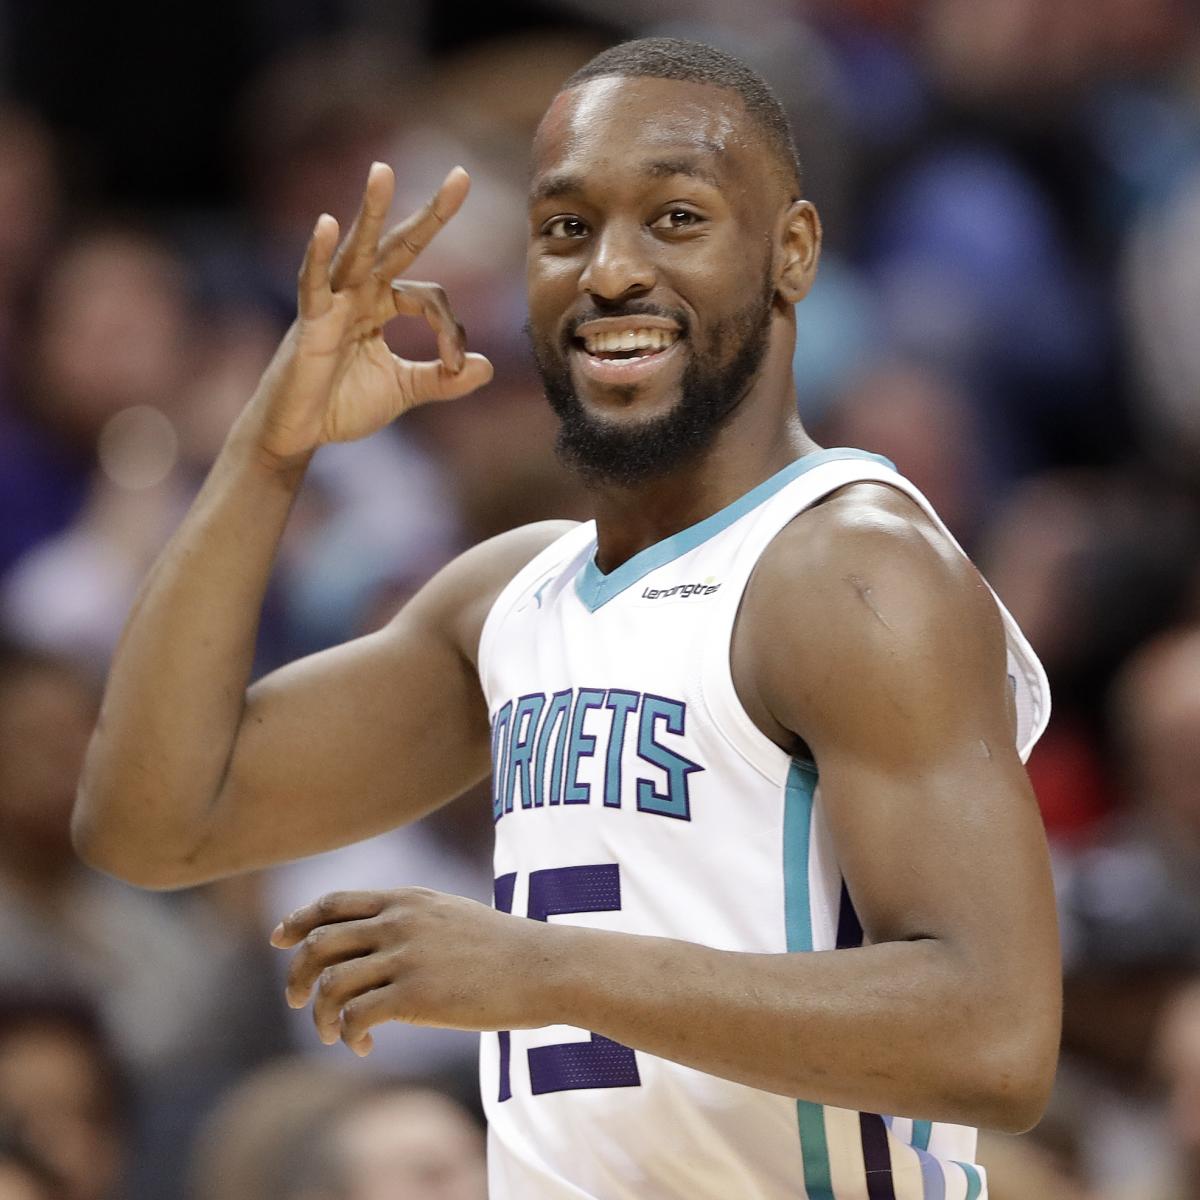 Ex-NBA star Kemba Walker heads oversees to play in Europe